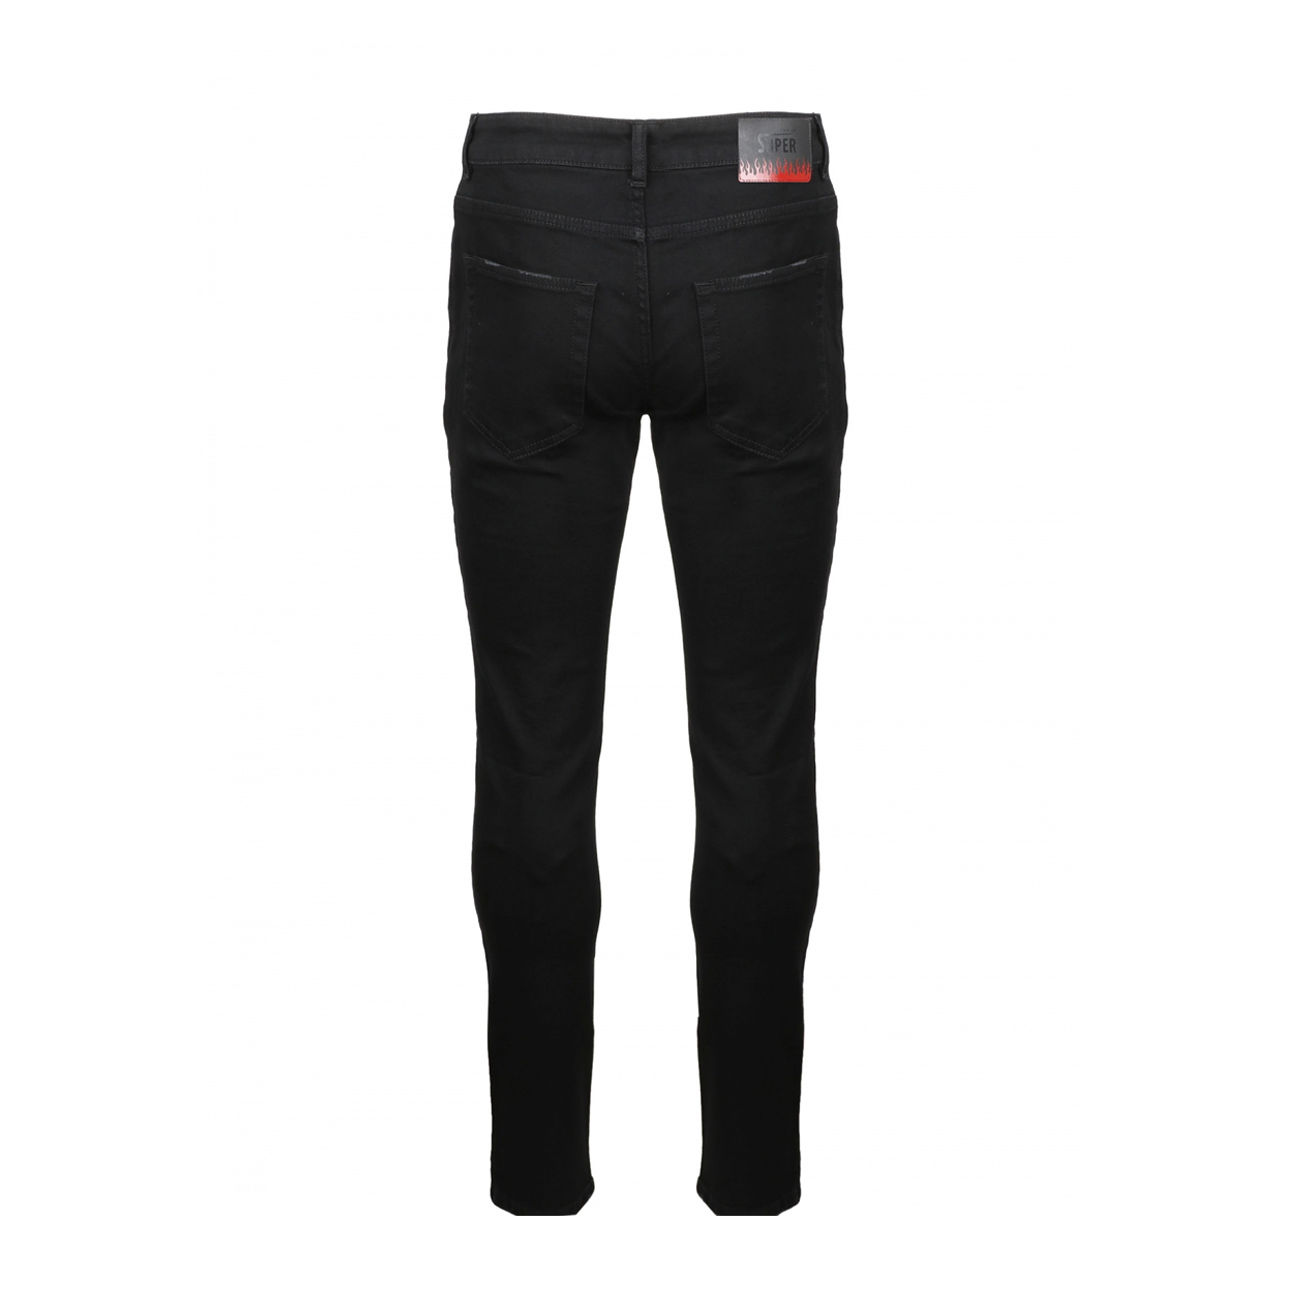 https://data.mascheronistore.com/imgprodotto/skinny-jeans-with-red-yellow-flames-rip-man-vintage-black_81258_zoom.jpg